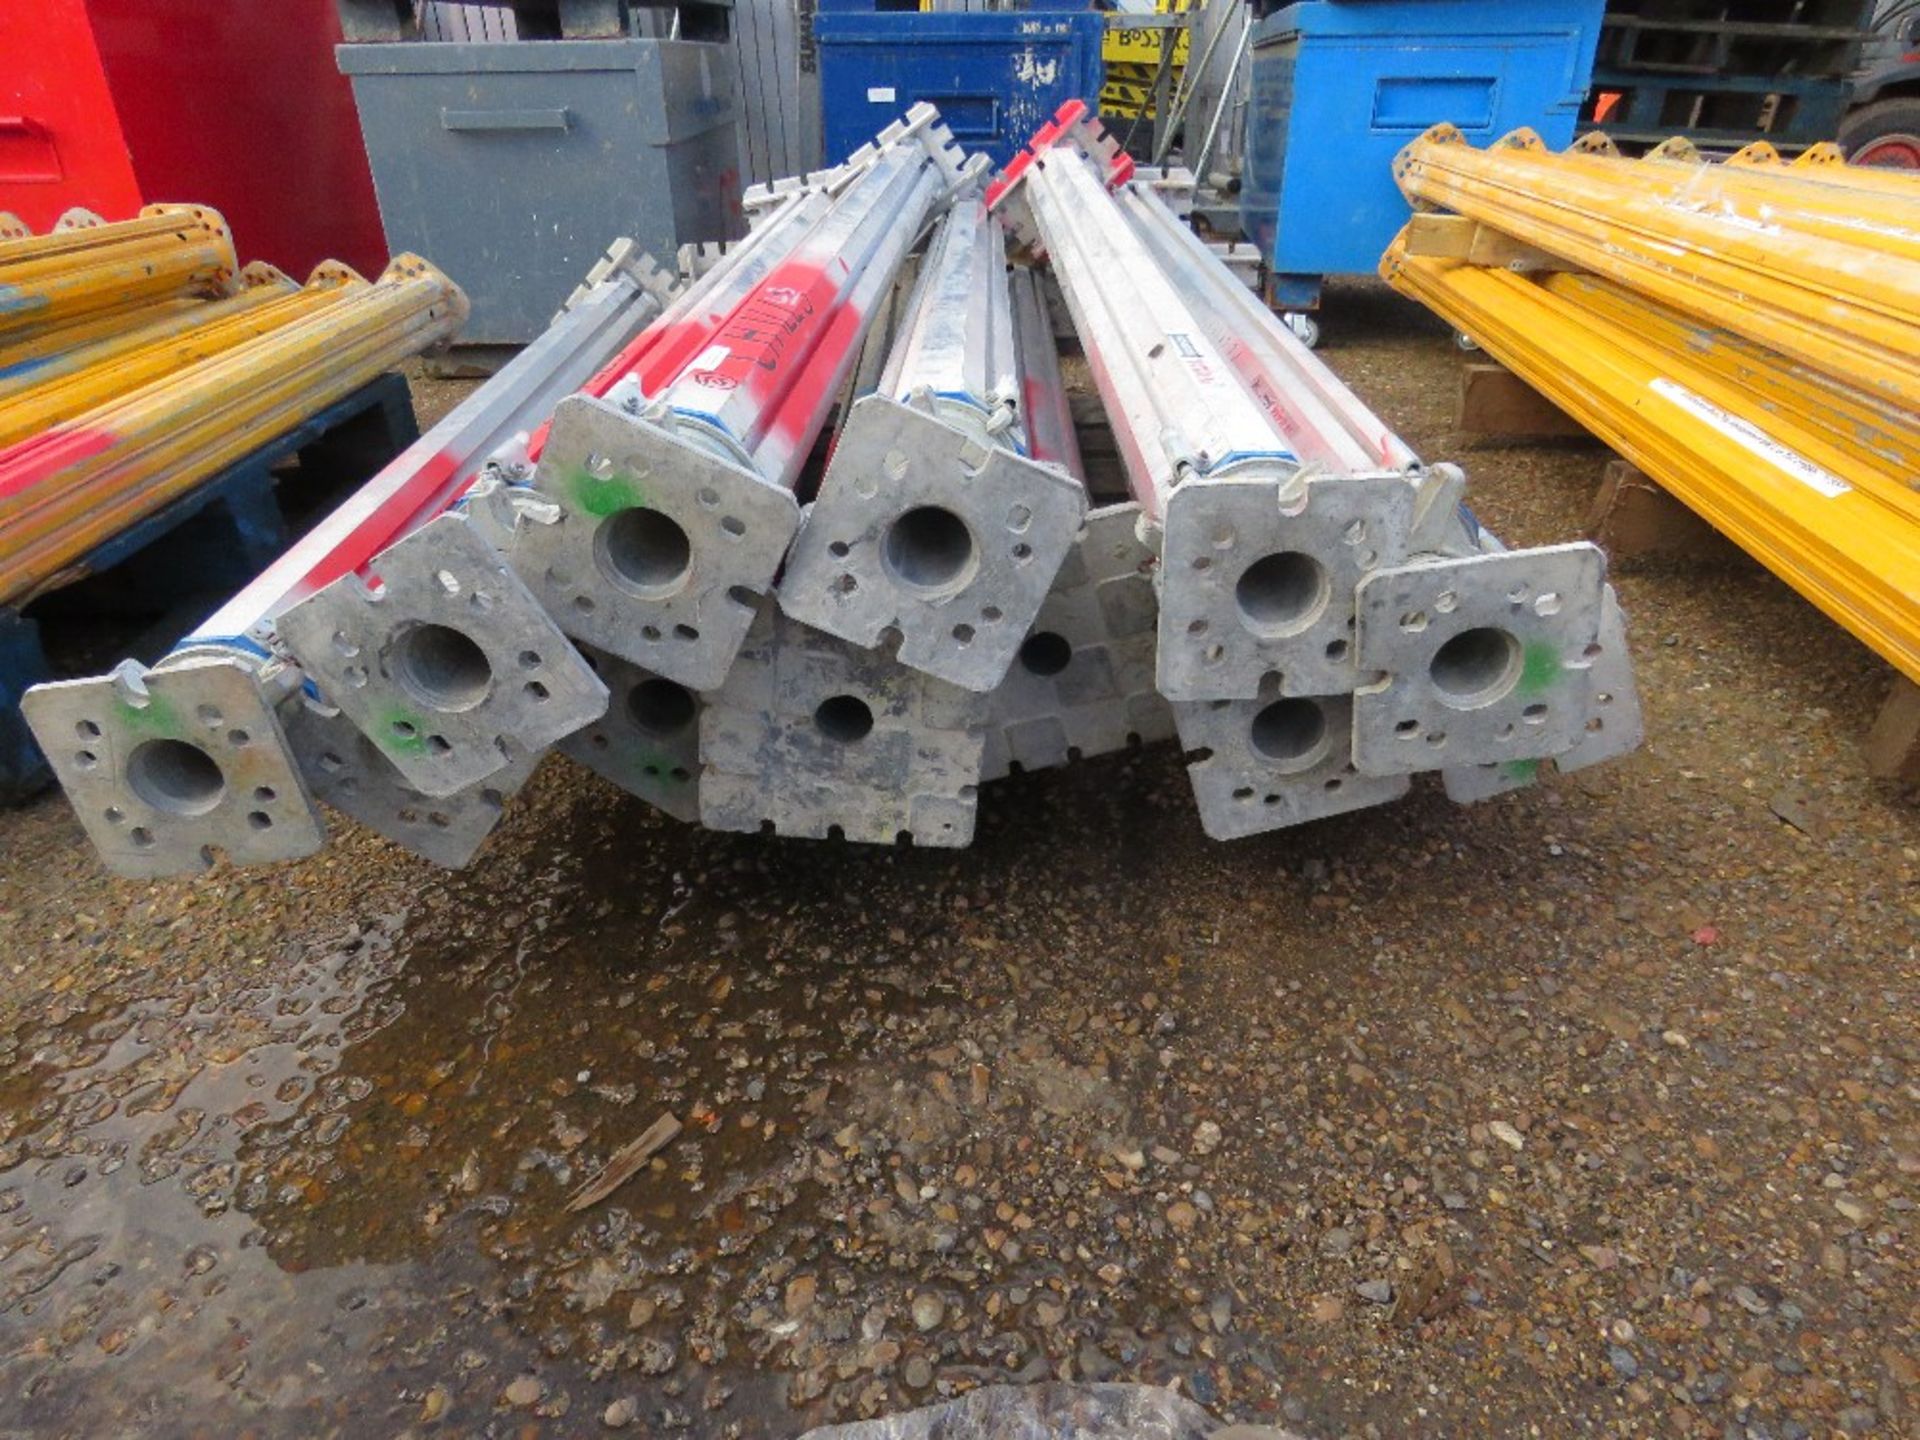 12 X ADJUSTABLE ALUMINIUM FORMWORK PROPS. 1.7 METRES CLOSED LENGTH APPROX. (TITAN MAKE). SOURCED - Image 2 of 2